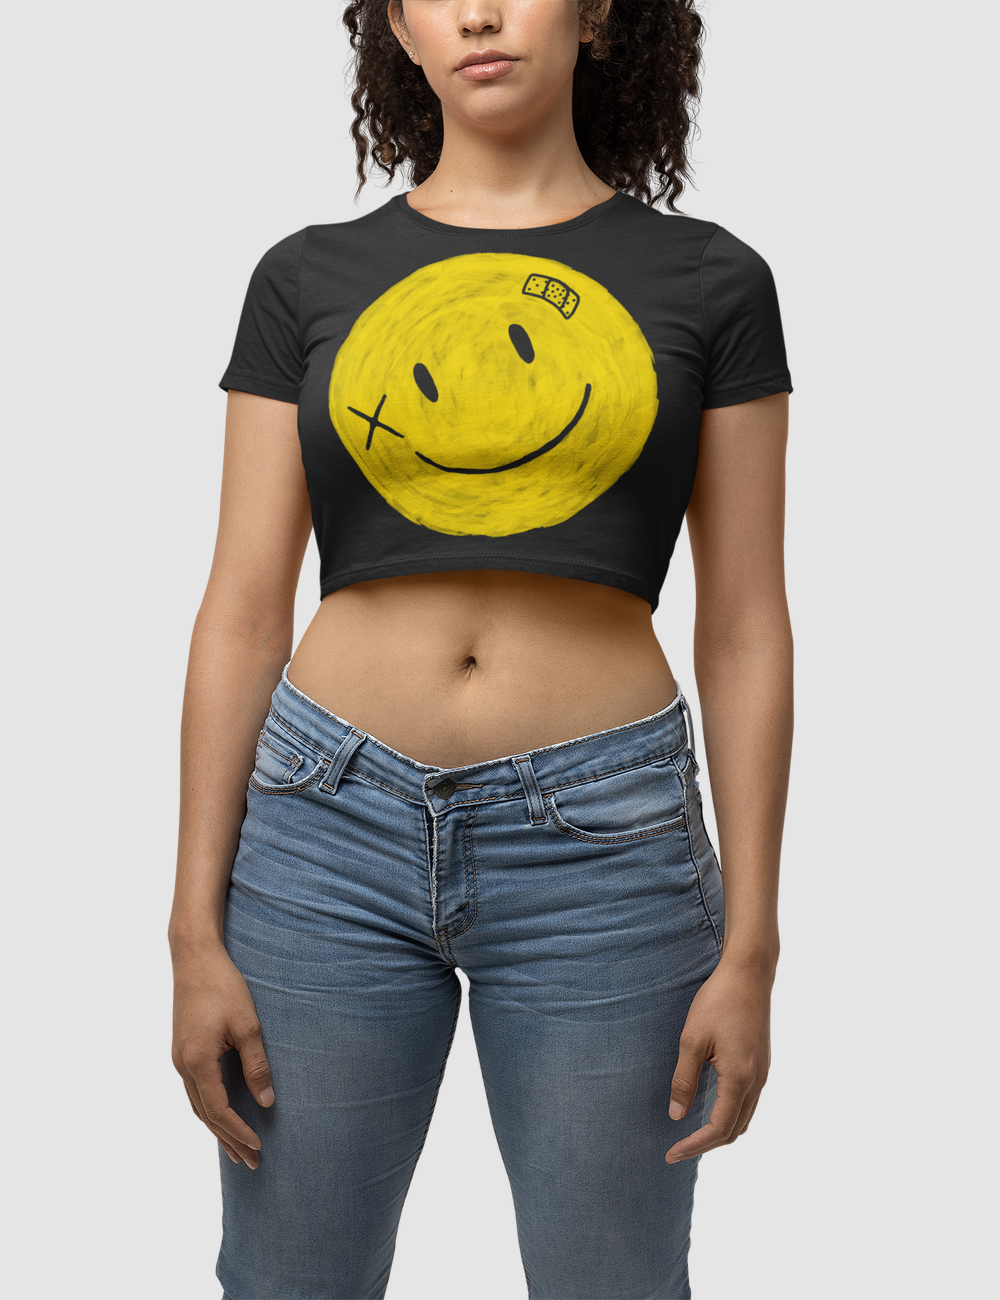 Battered Smiley Face Women's Fitted Crop Top T-Shirt OniTakai